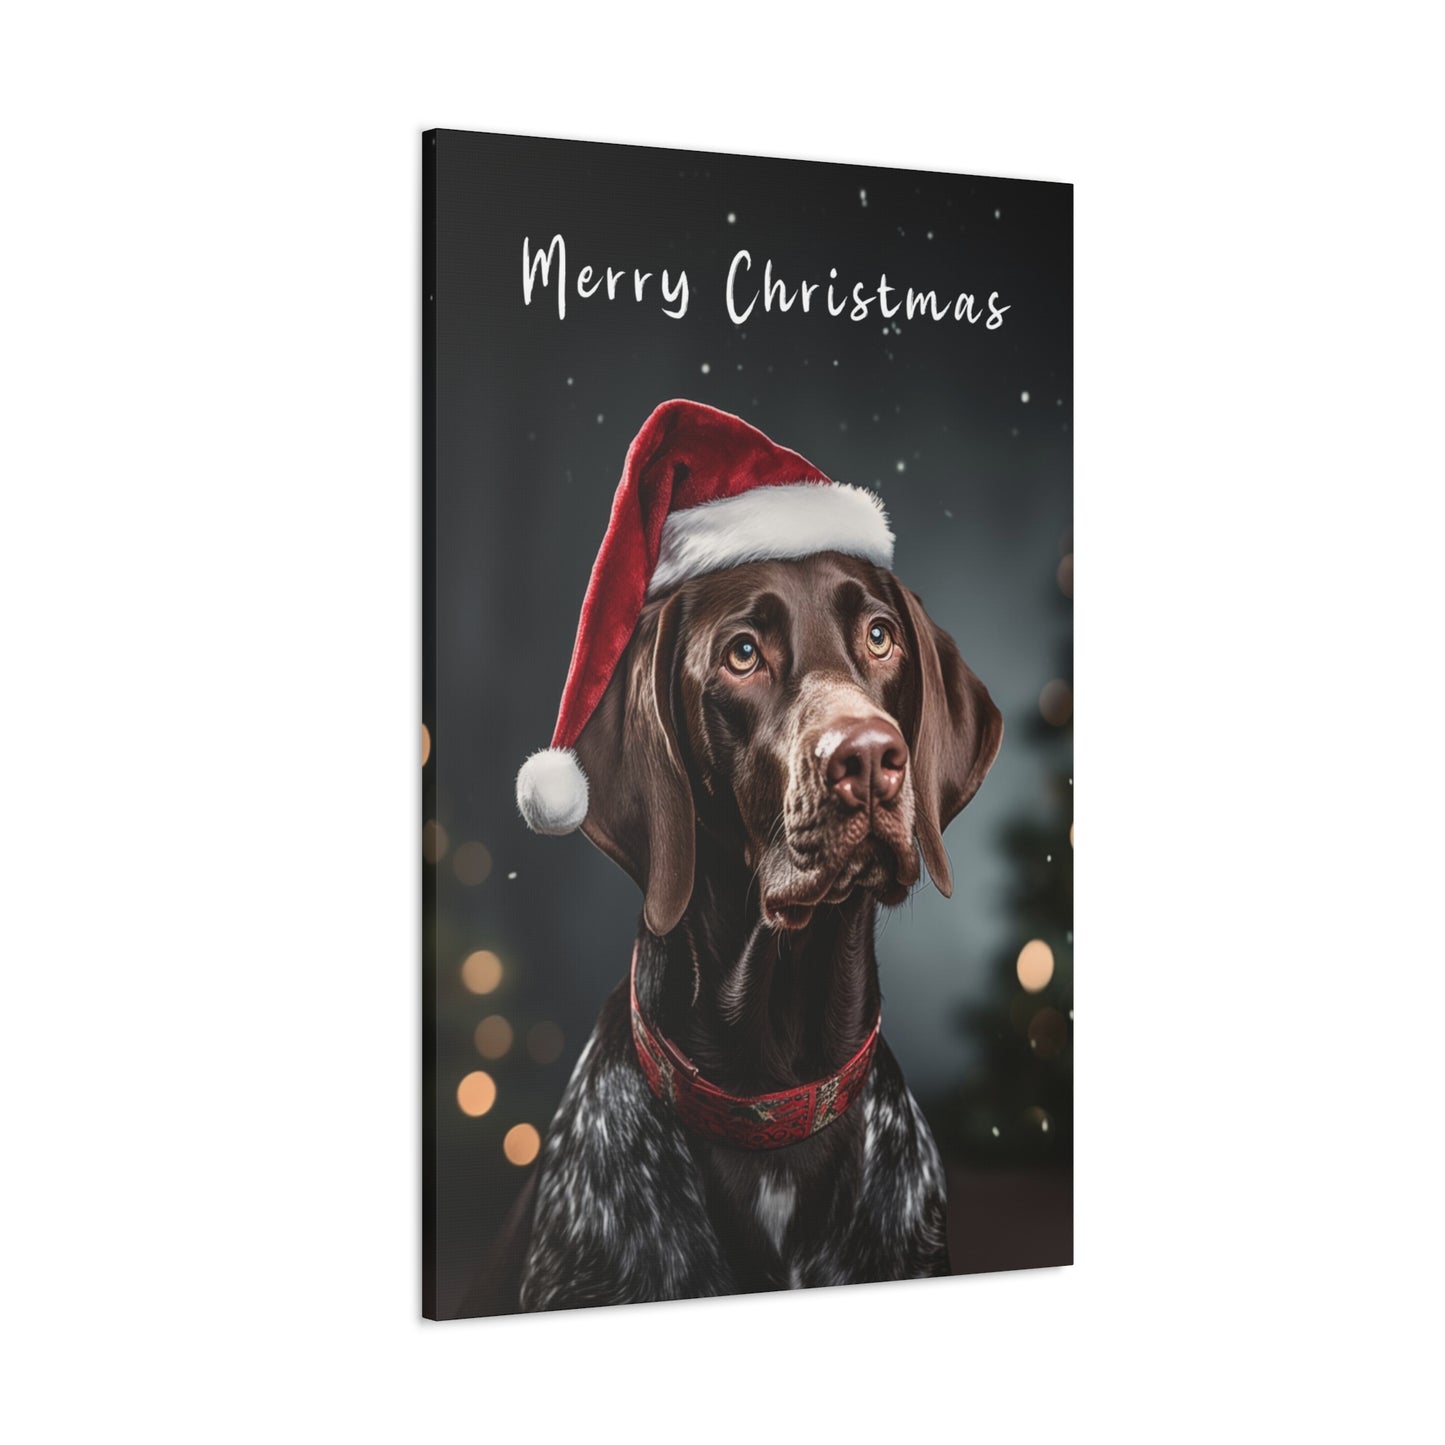 Merry Christmas German Shorthaired Pointer wearing Santa hat canvas print